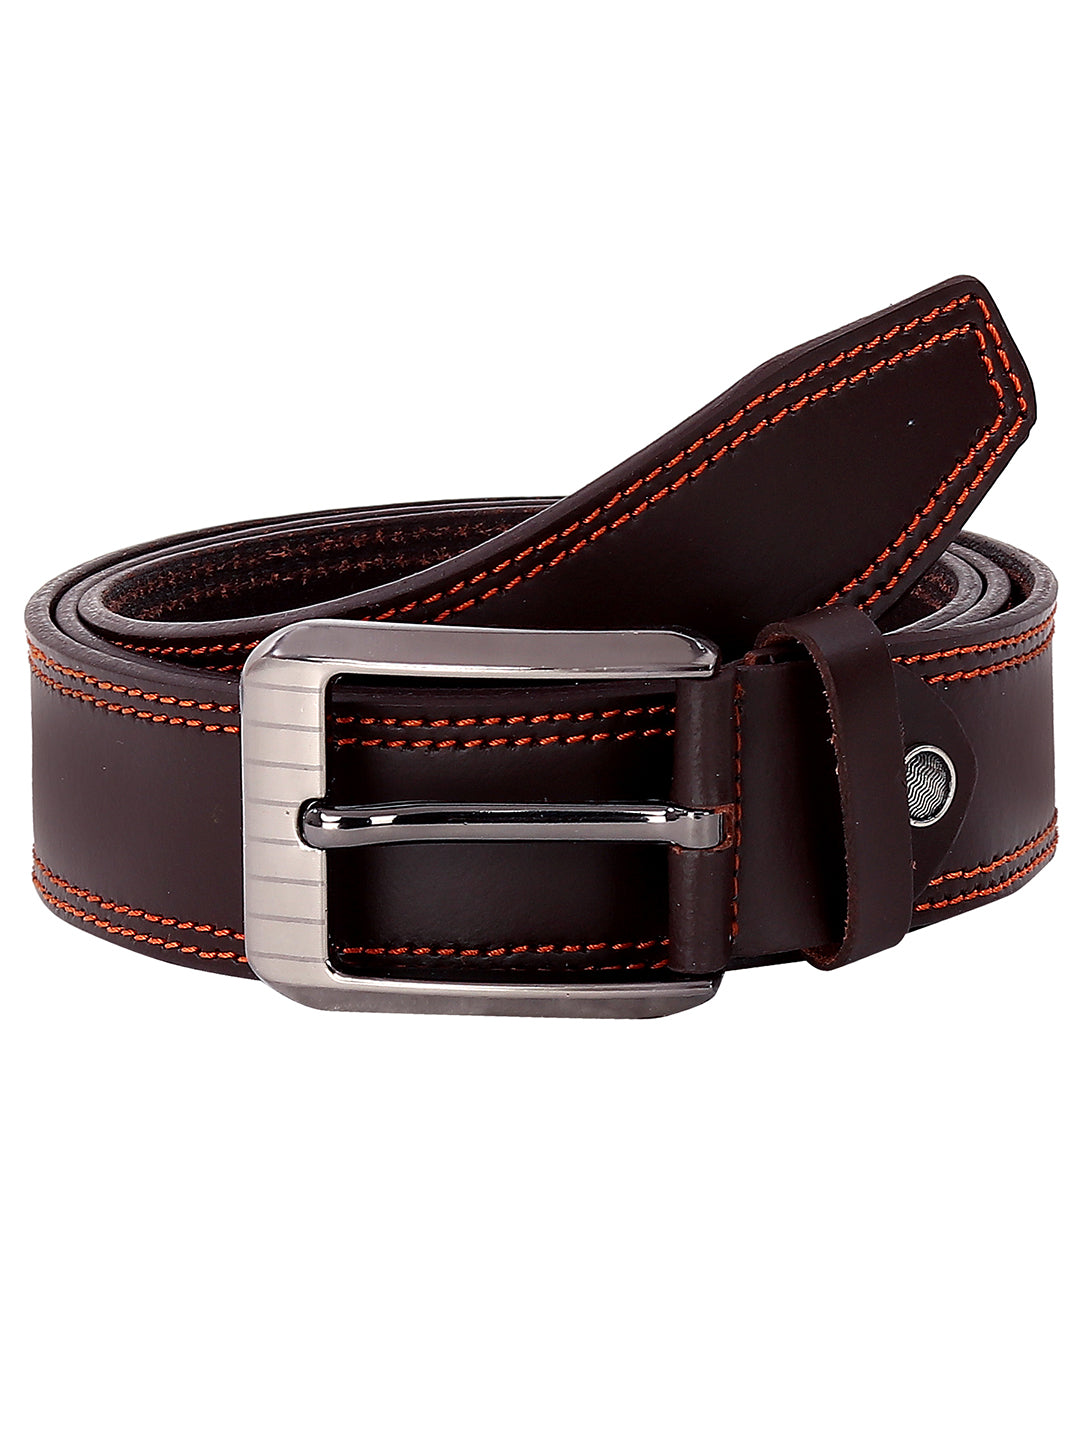 Leather World Formal Casual Brown Branded Stylish Genuine Leather Belts For Men